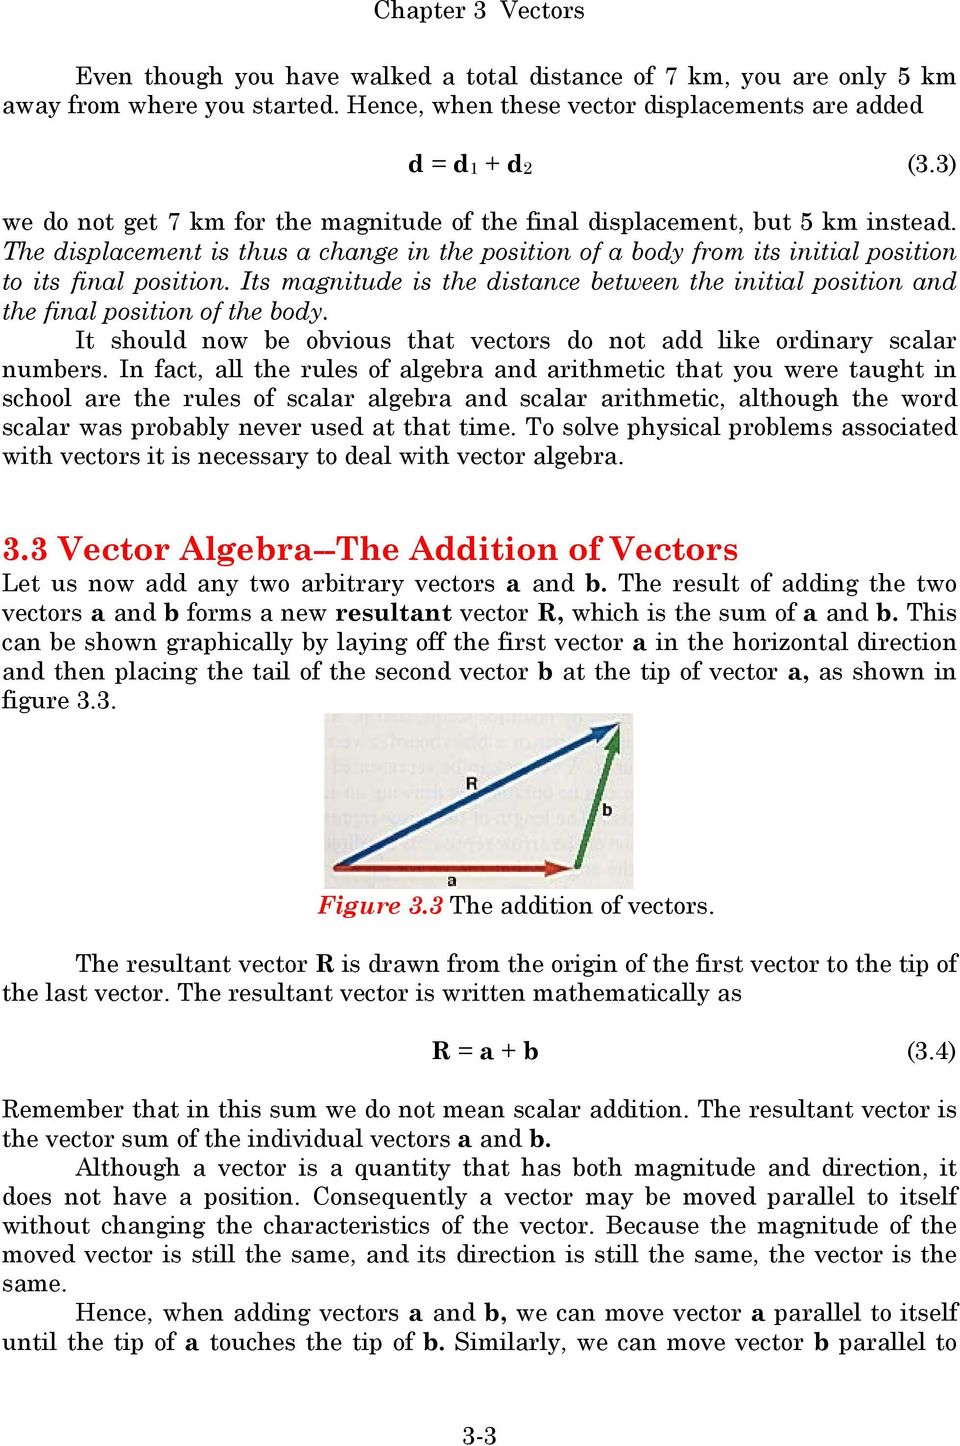 Its magnitude is the distance between the initial position and the final position of the body. It should now be obvious that vectors do not add like ordinary scalar numbers.